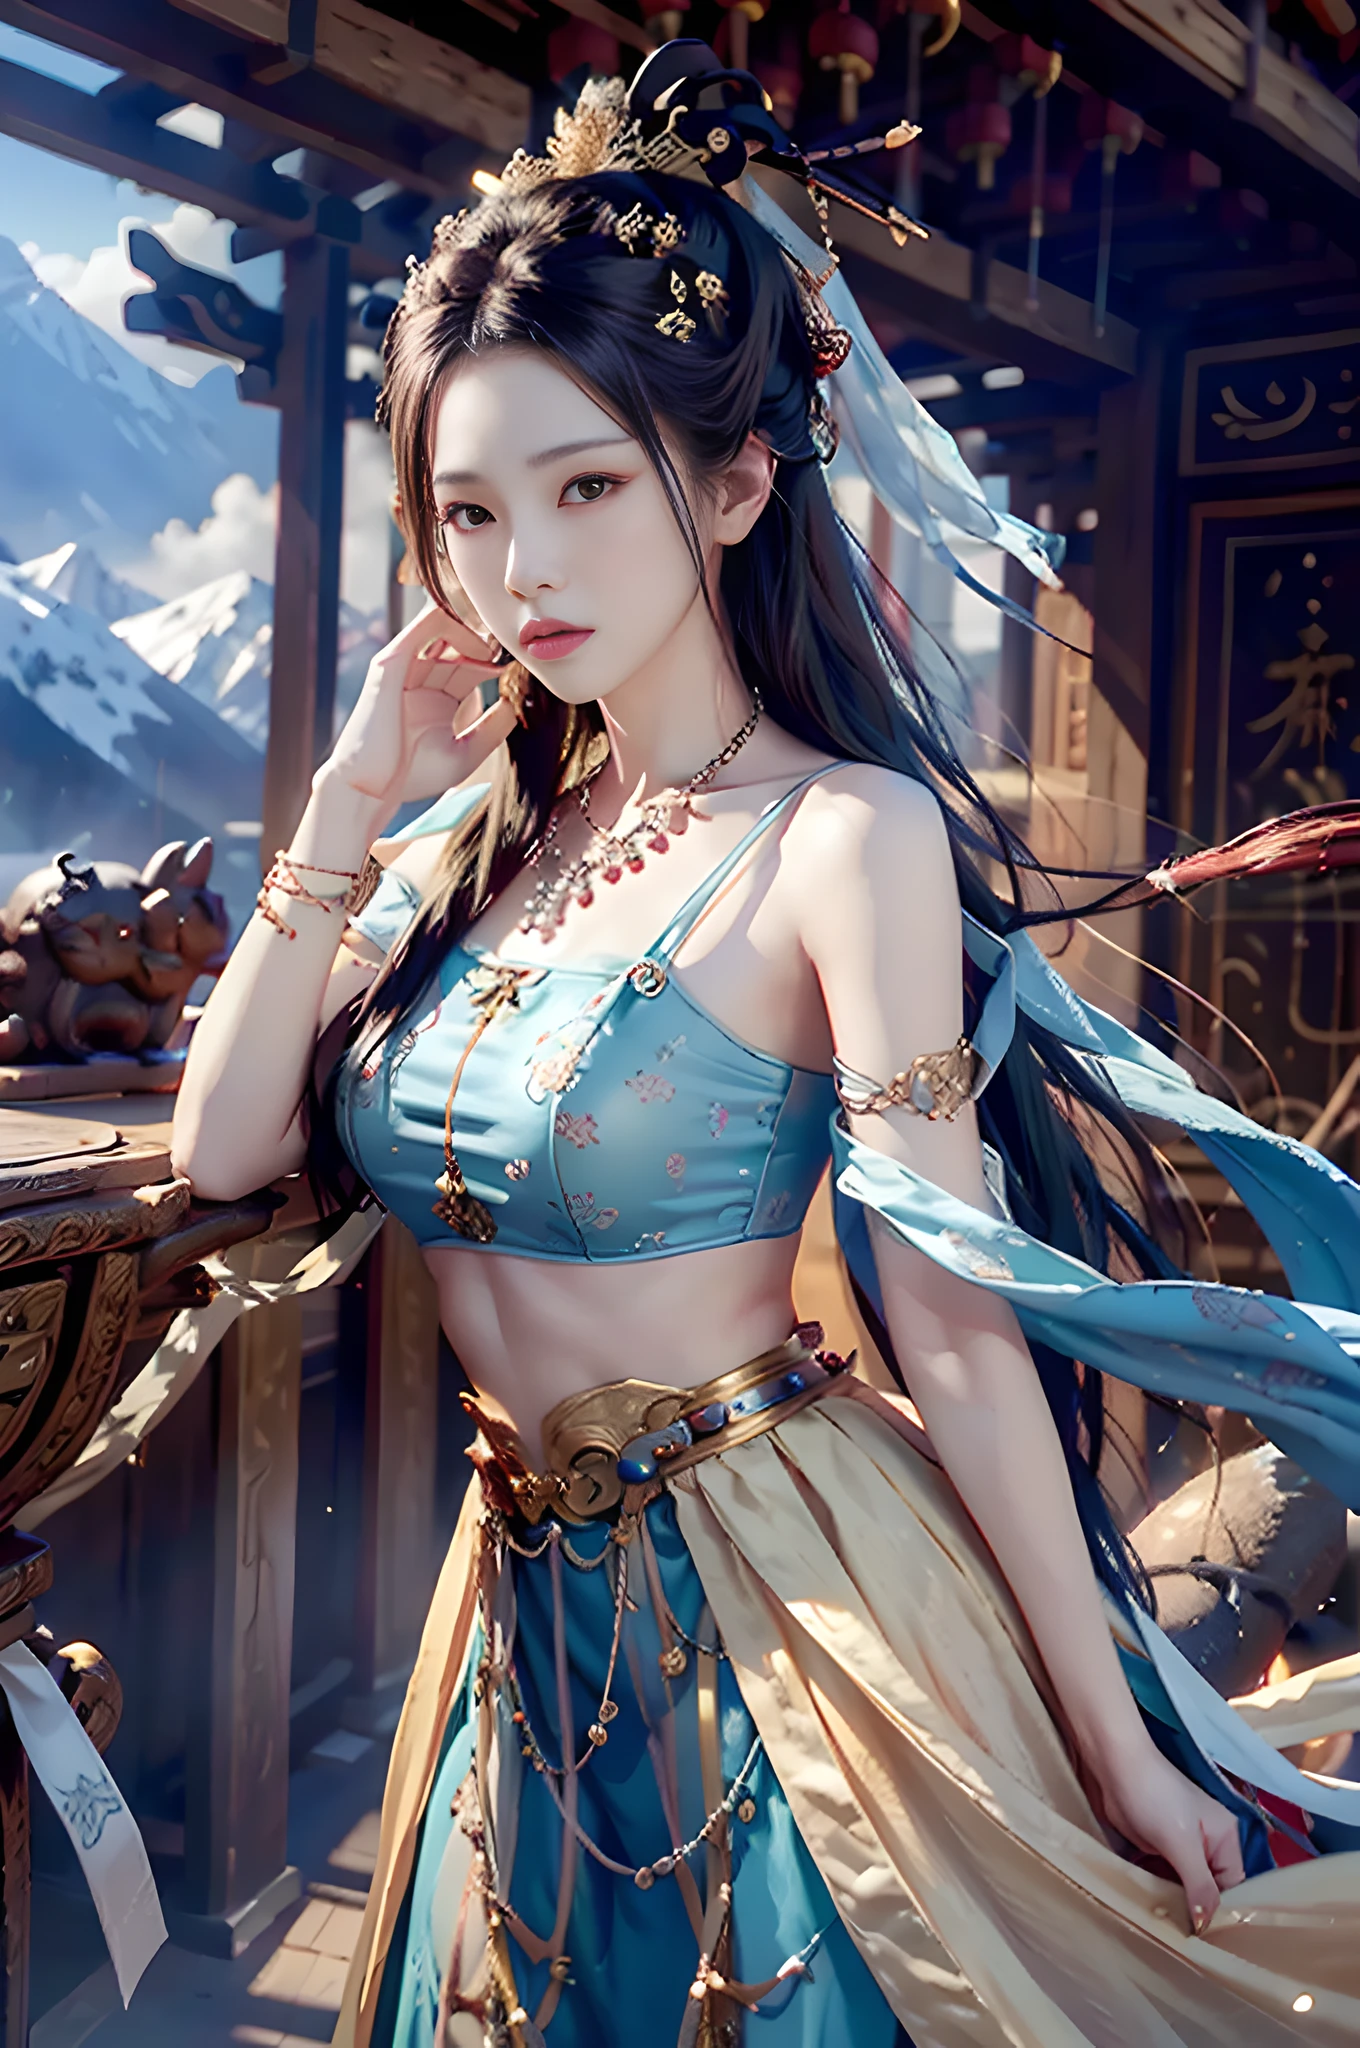 best qualtiy, tmasterpiece, Ultra-high resolution, （realisticlying：1.4）, snow mountains，drifting snow，missiles, Detail Make，Metal armor， 1girll, solo, missiles, （Magical Circle：1.2）, Streamers，xiuxian, The upper part of the body, a beauty girl, full bodyesbian, east asian architecture, ,  bead necklace, smug, filmgrain, Fuji colors, Textured skin